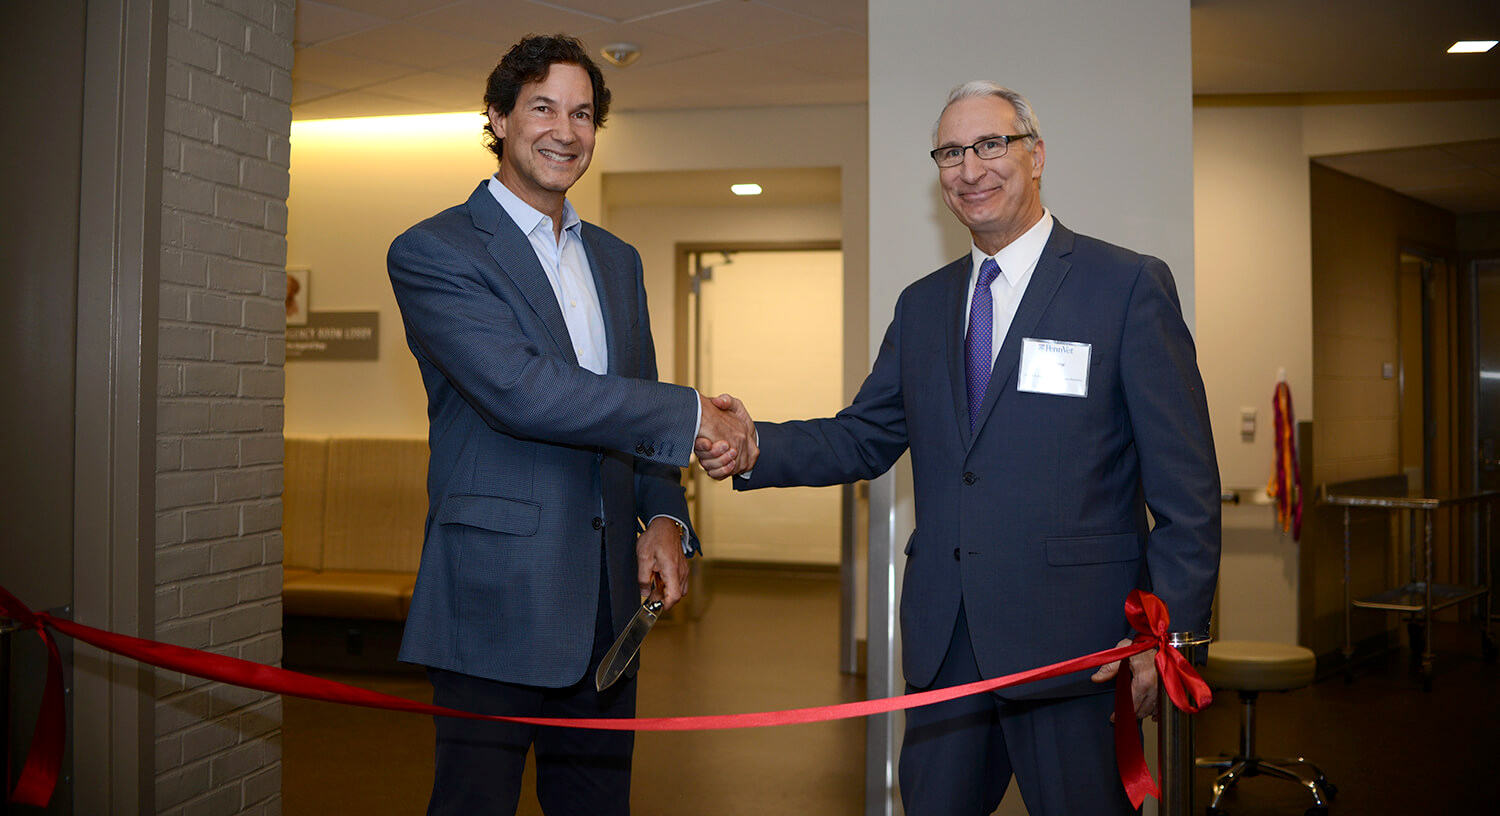 Richard Lichter and Dean Andrew Hoffman shake hands before cutting the ribbon at the dedication of the Richard Lichter Emergency Room.